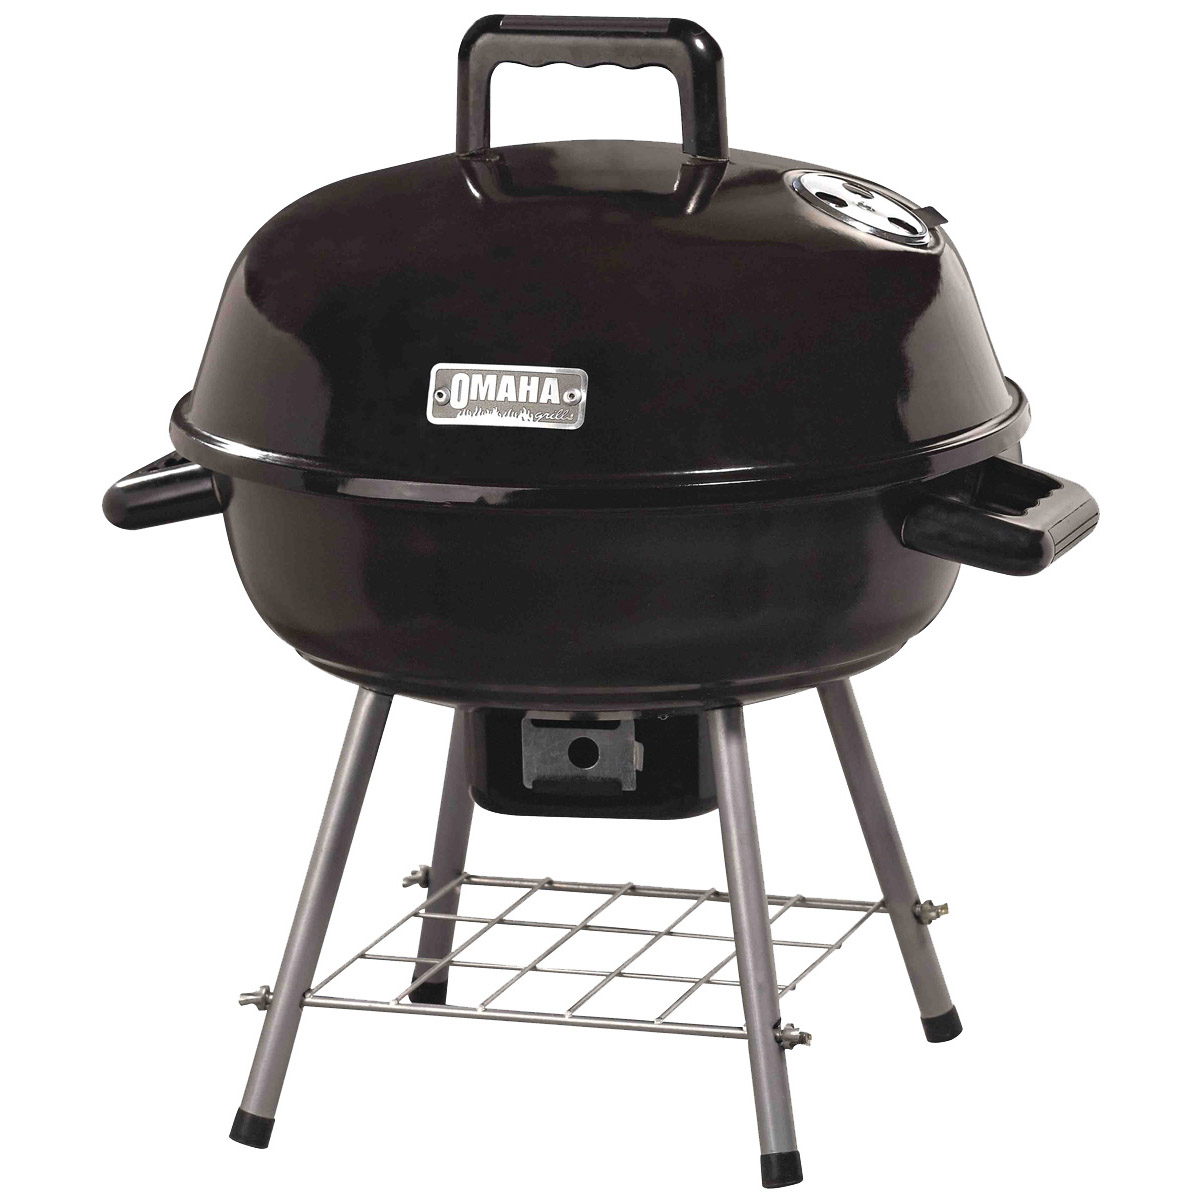 Omaha Charcoal Kettle Grill, 1-Grate, Black, Steel Body - 1